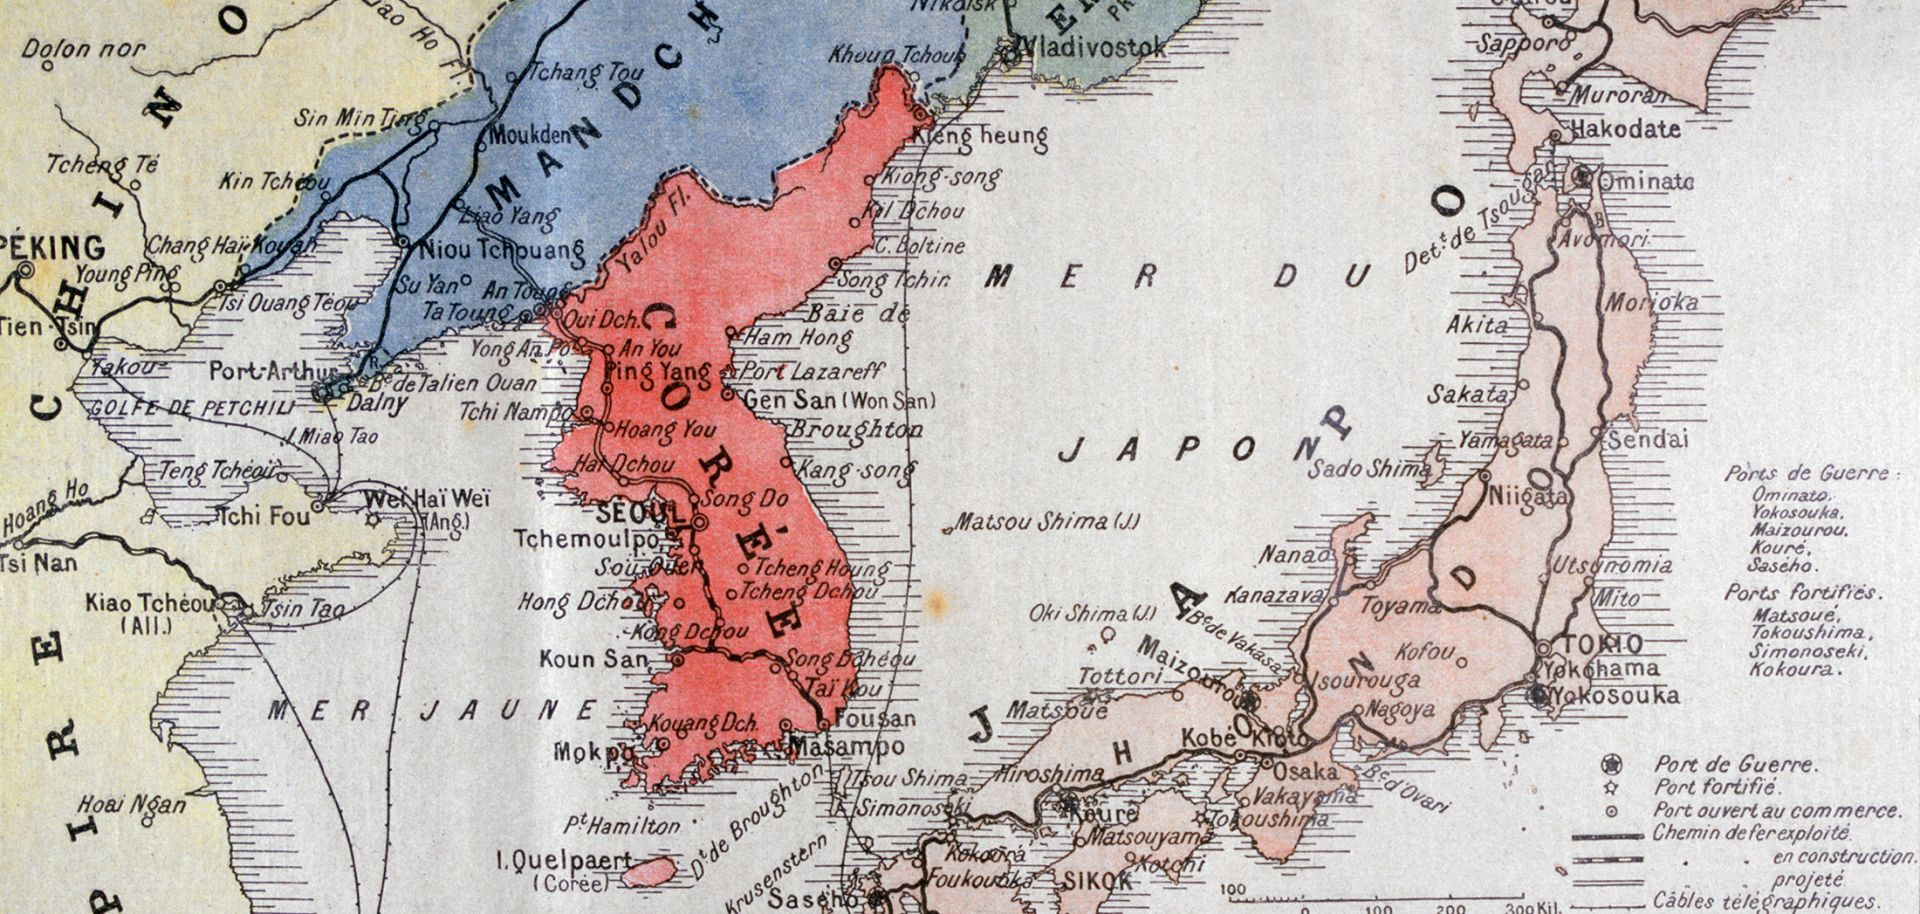 This map shows the theater of the war between Russia and Japan in 1904.